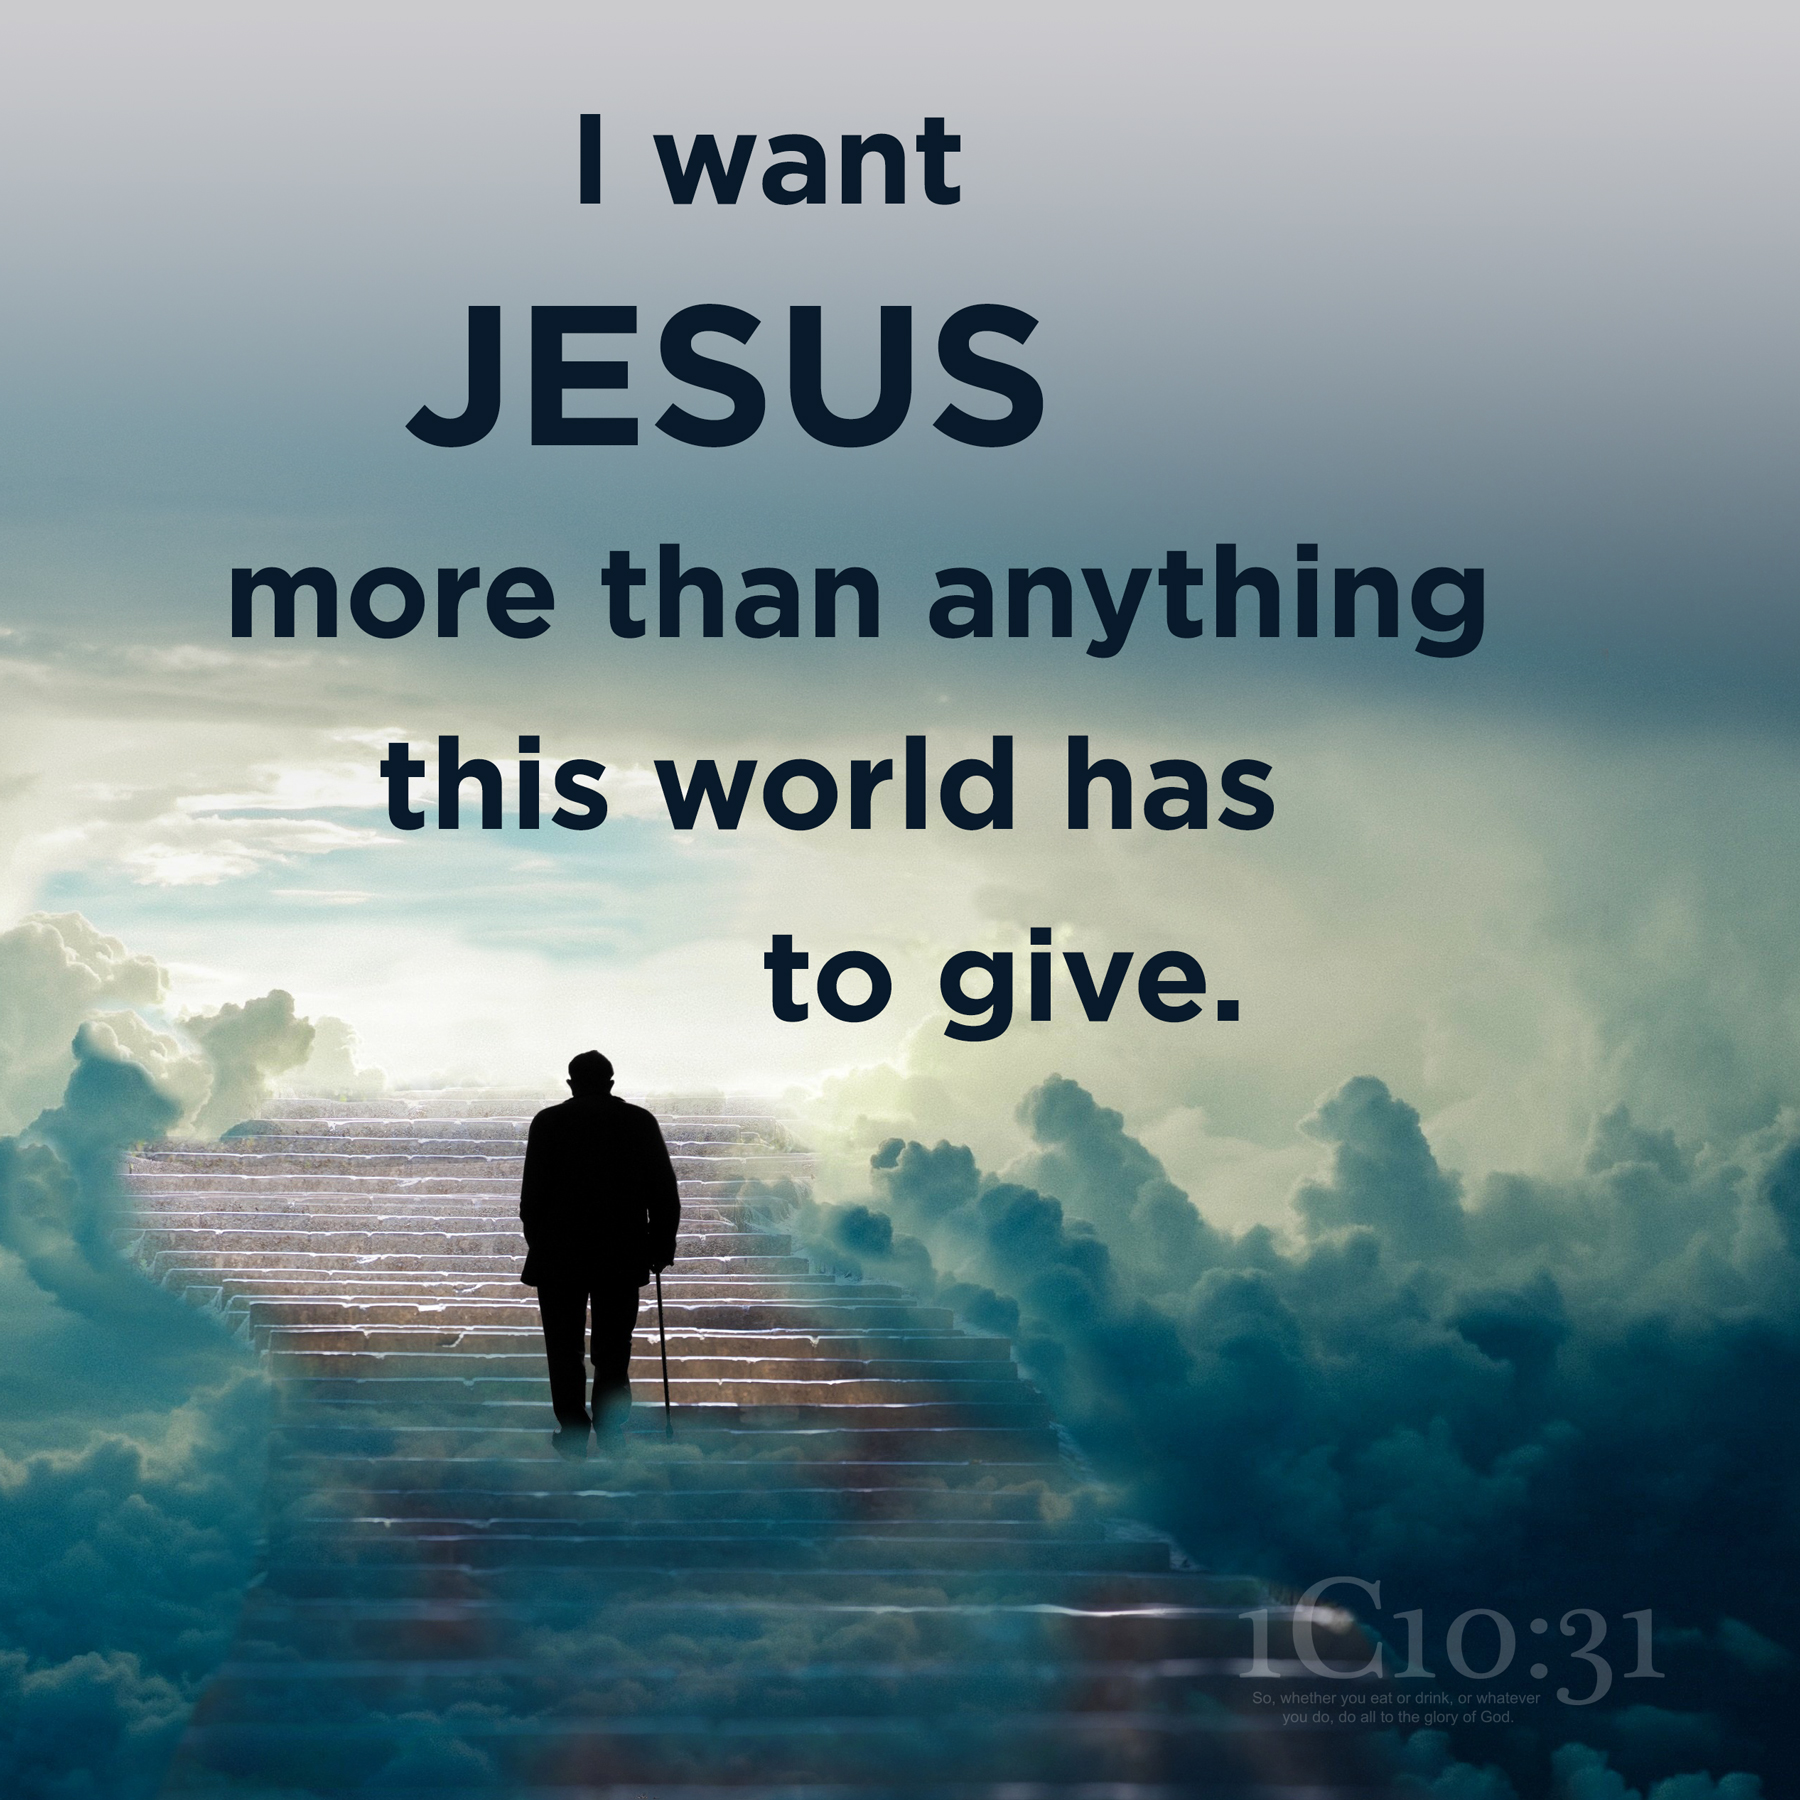 I want JESUS more than anything this world has to give.